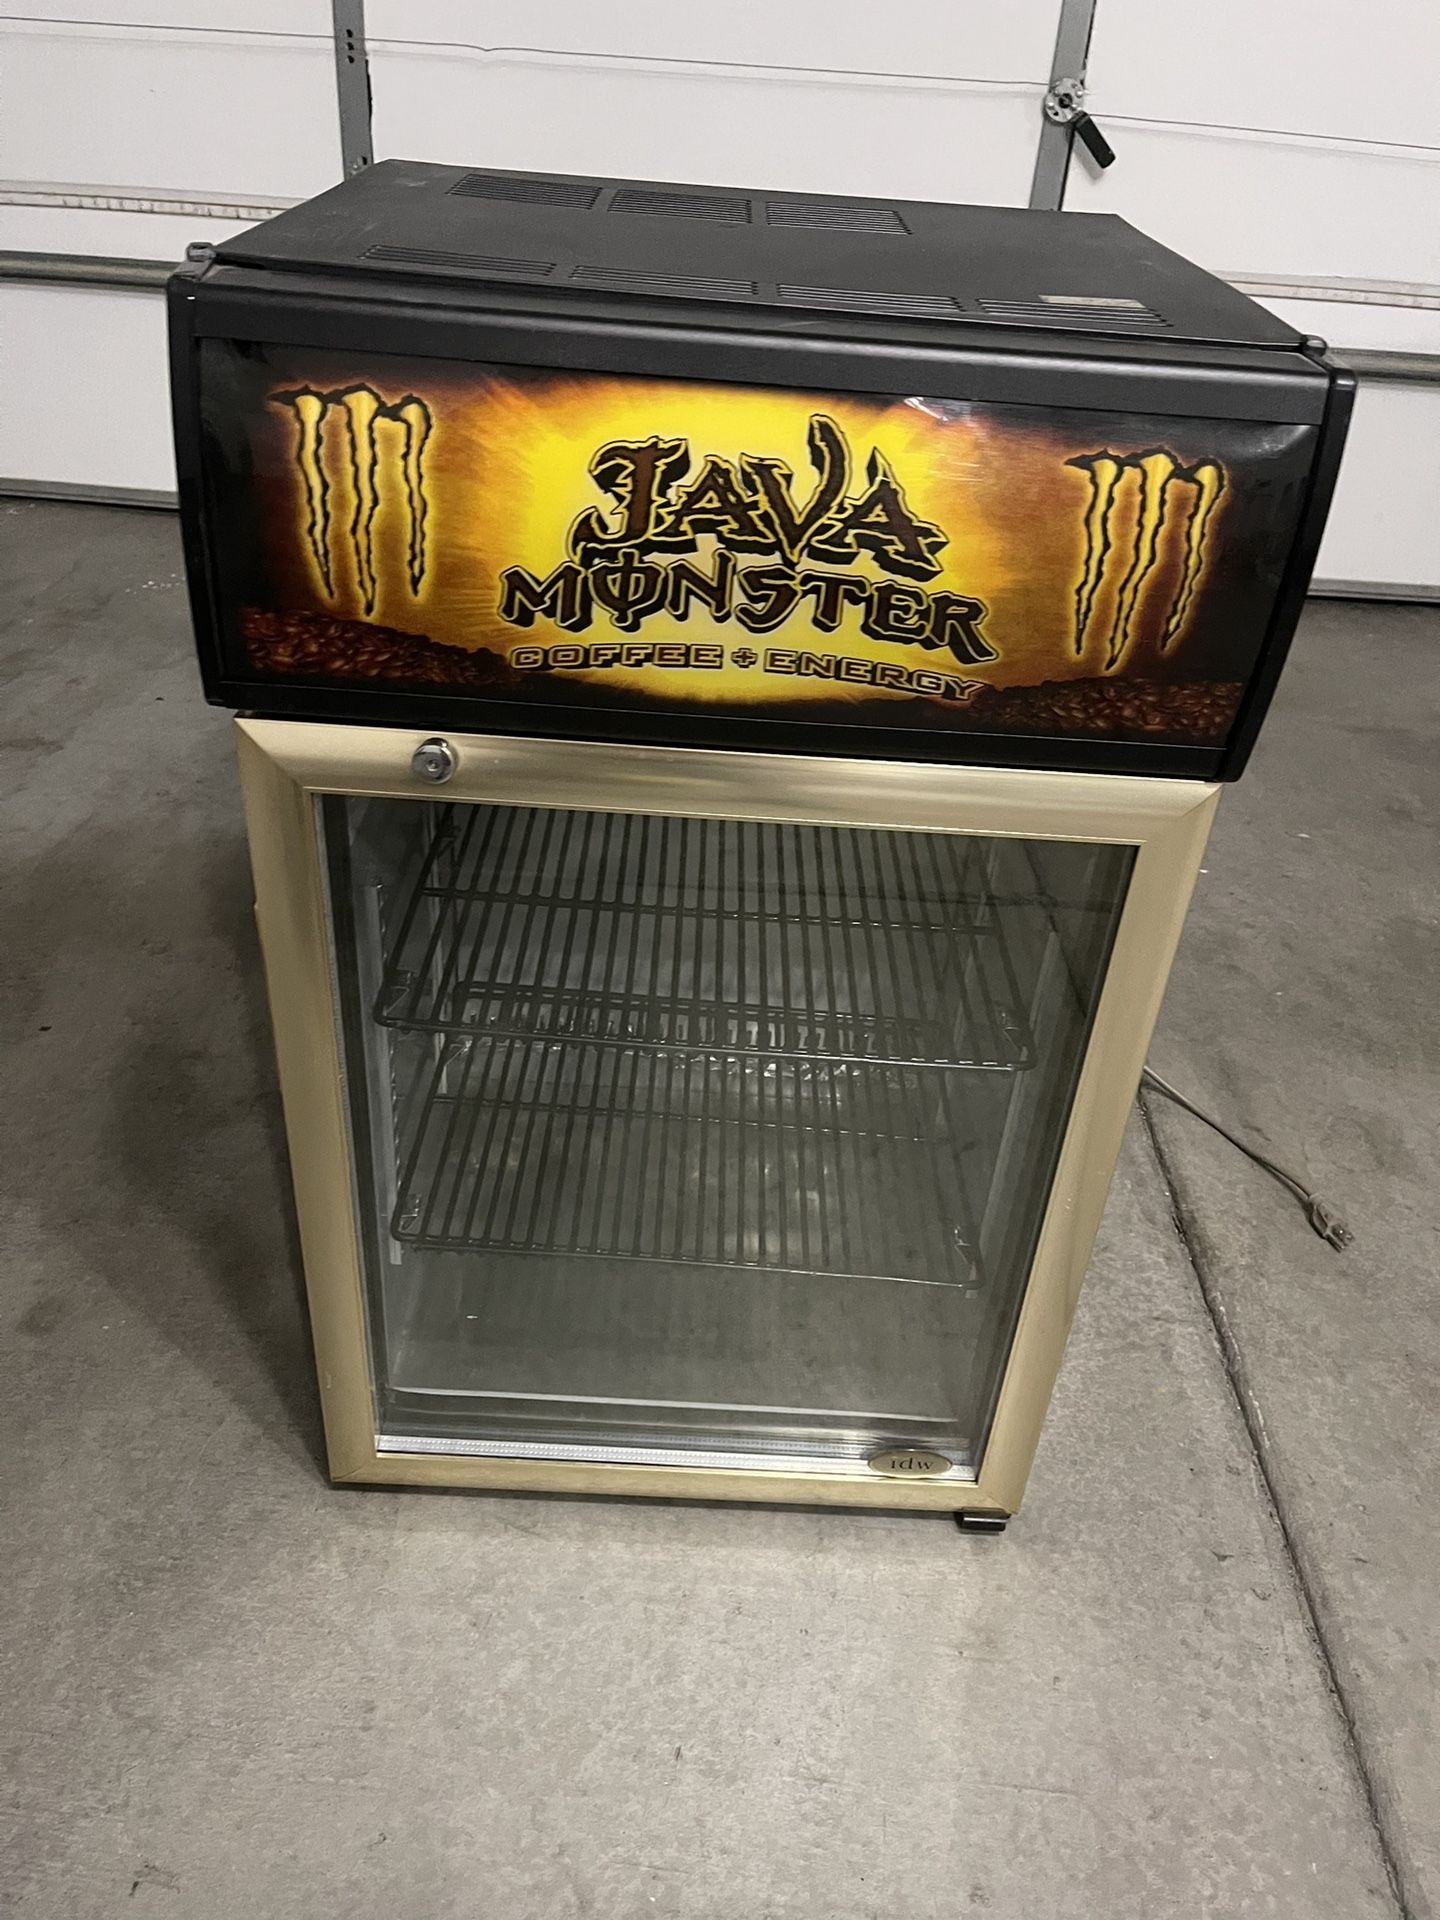 Java monster coffee energy rare mini fridge  Used some scratches from normal use please check all the pictures  Meserment:  High: 33” Wide: 20” Deep: 